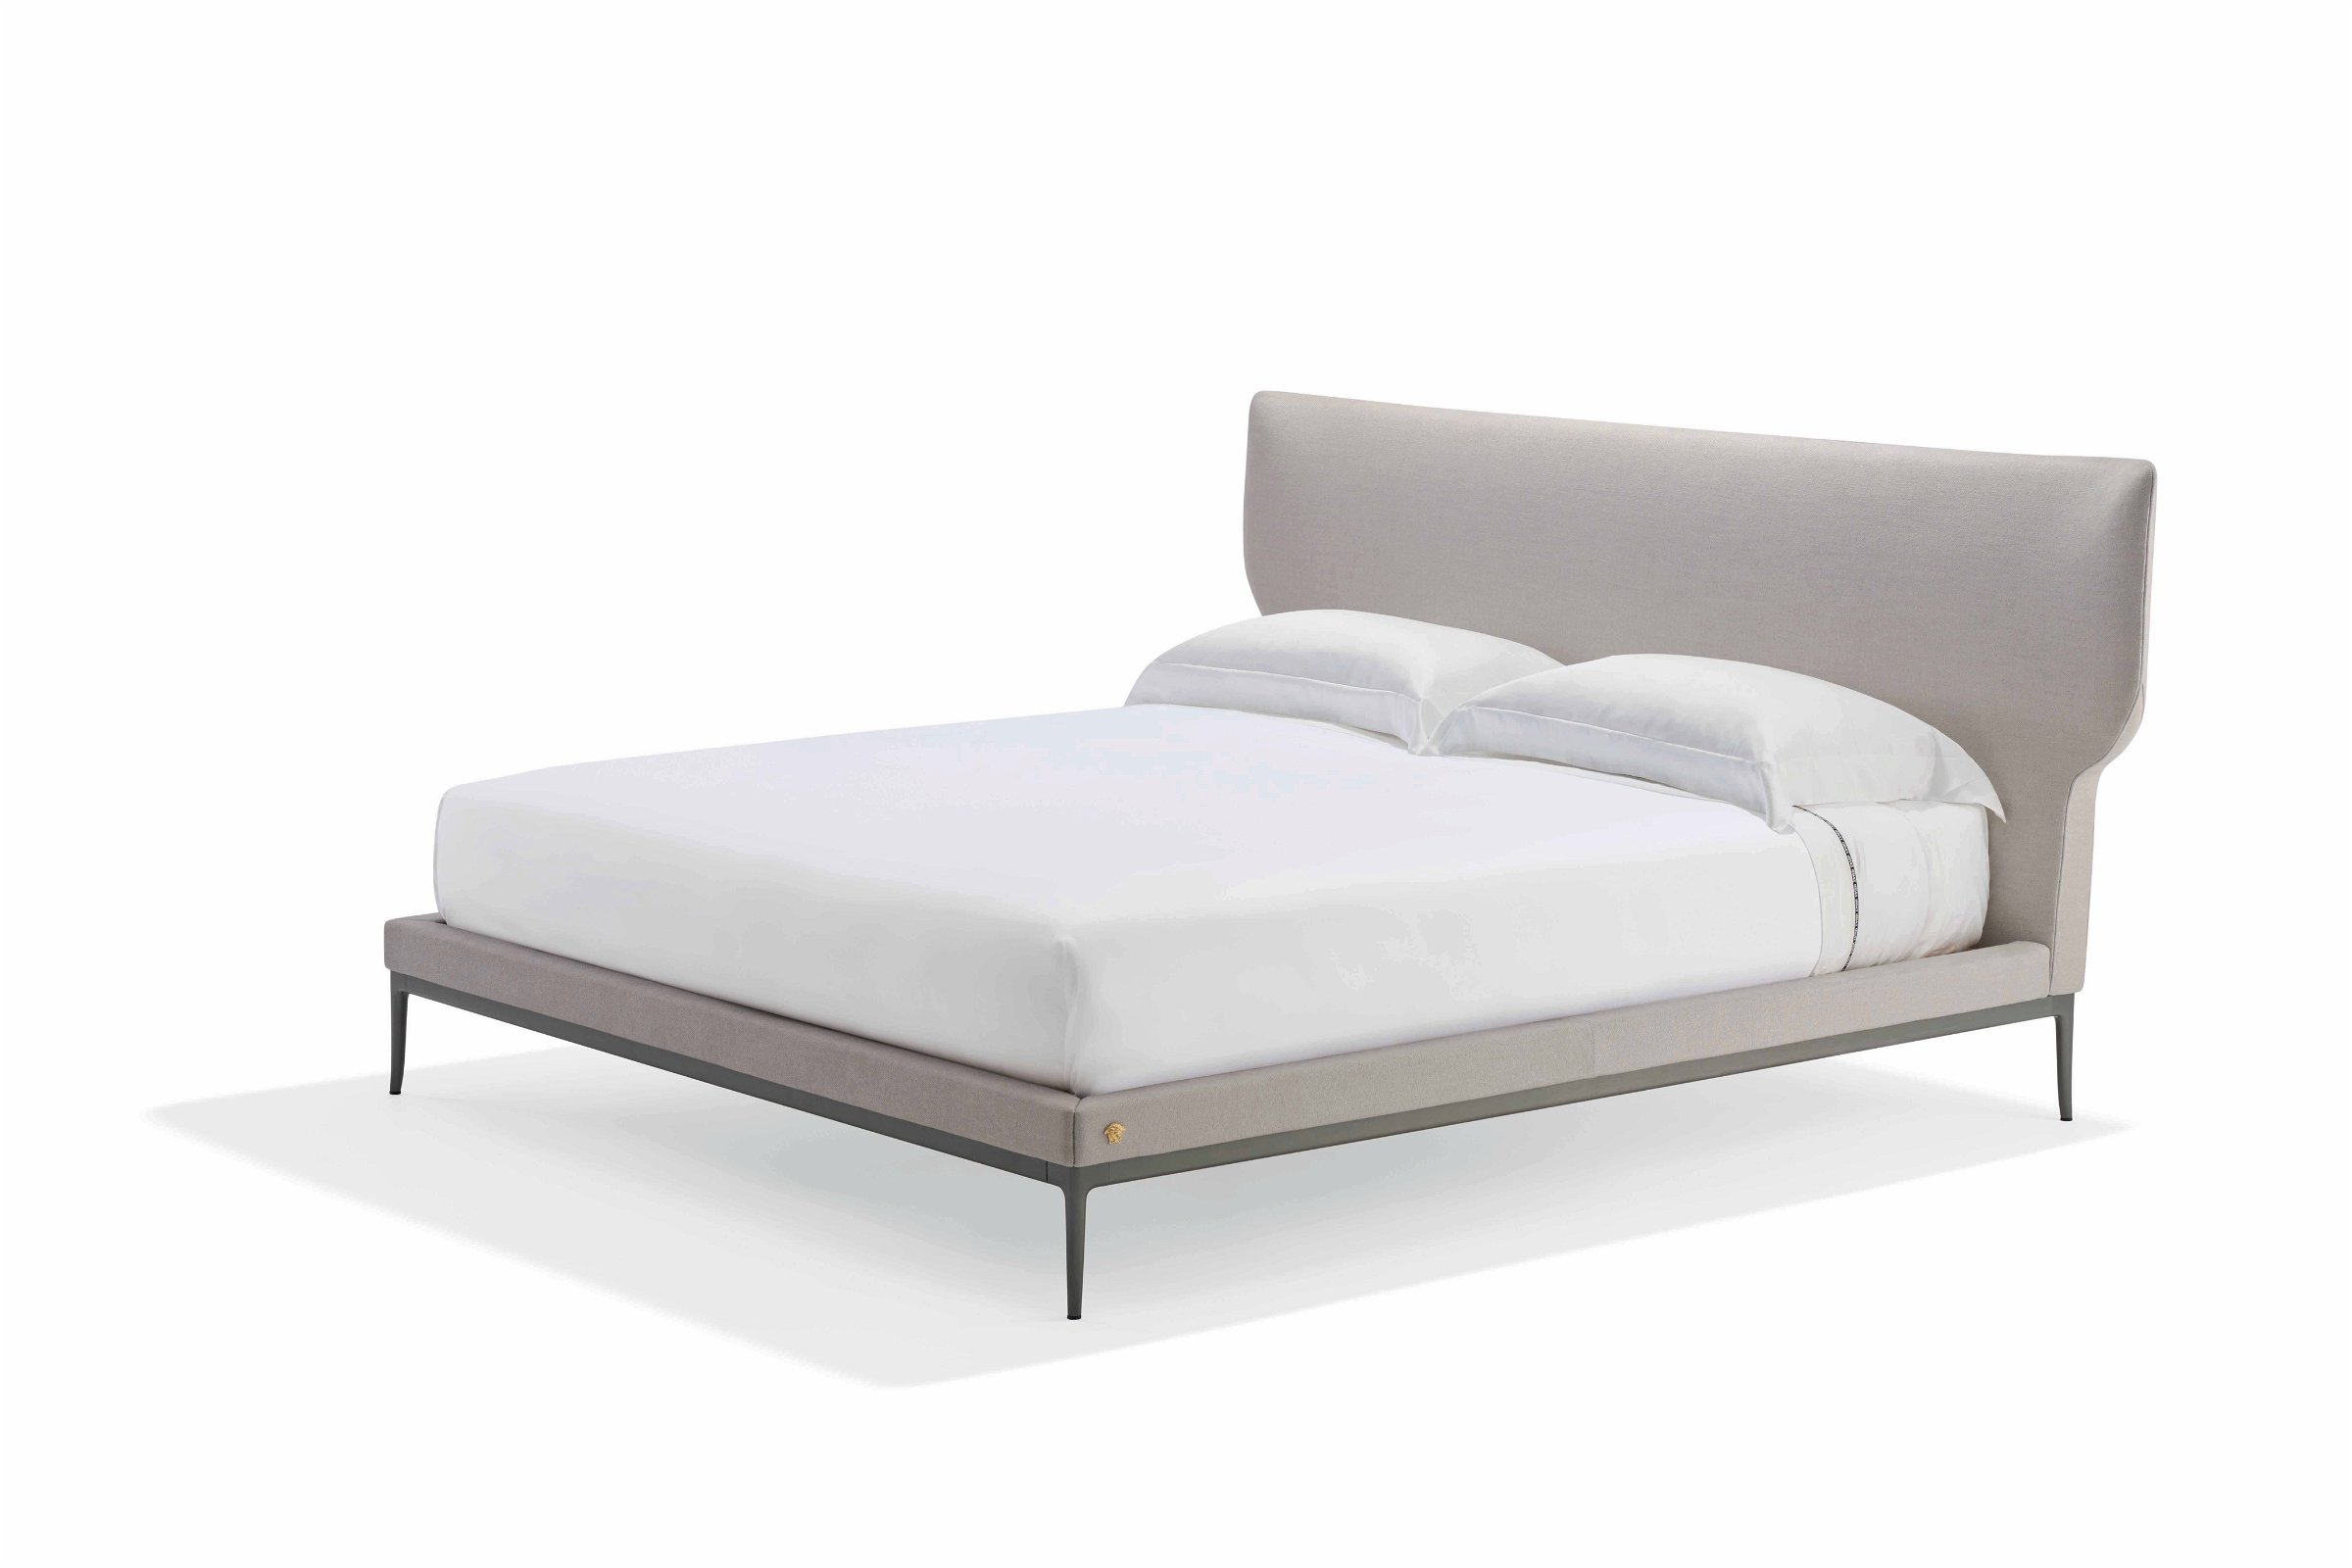 Versace Home Stiletto 22 High bed collection